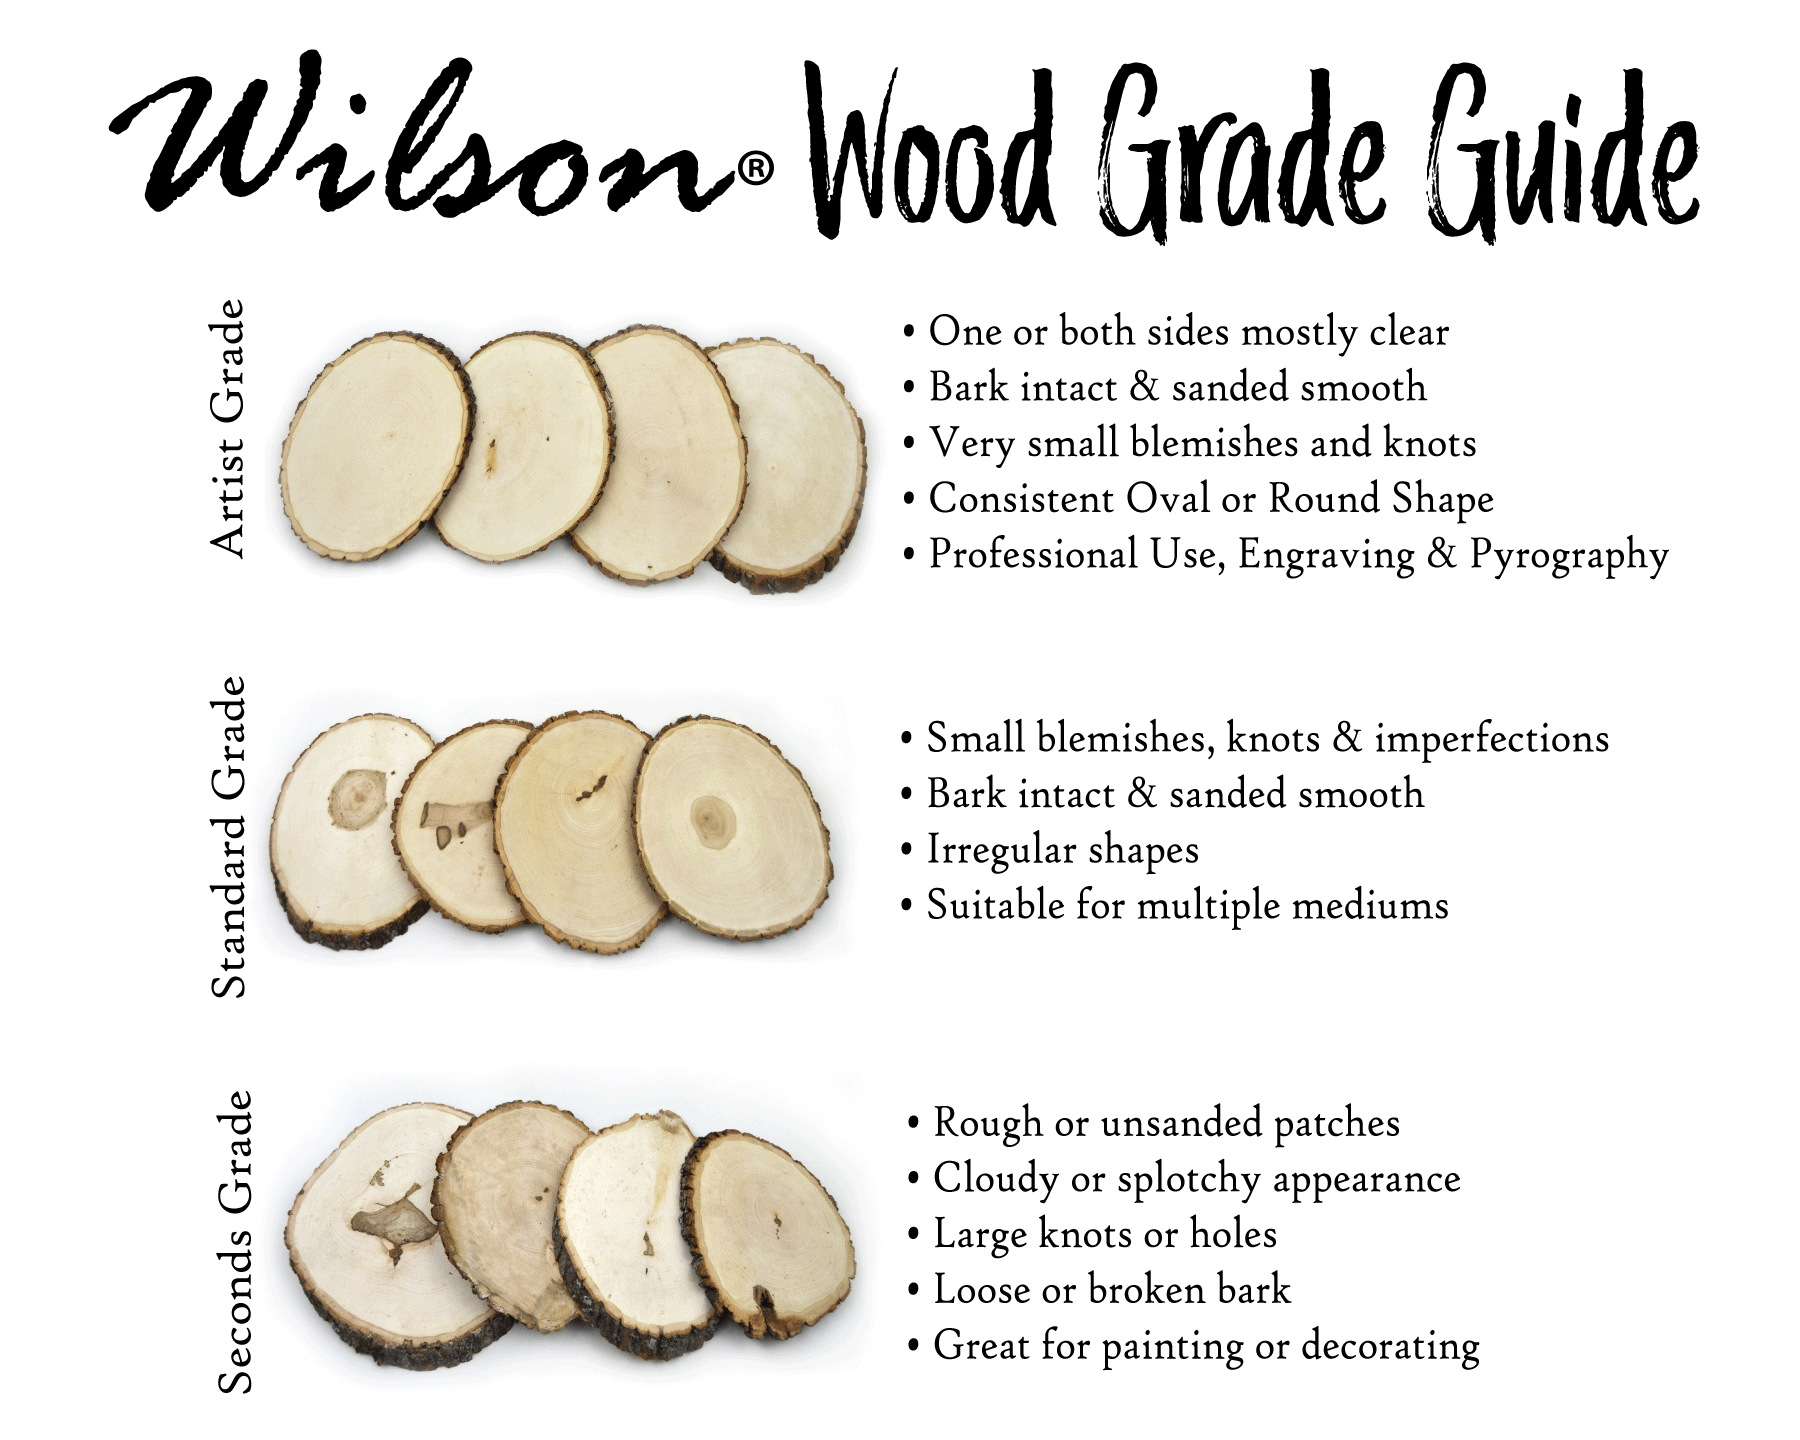 wood-grade-guide-for-web.gif